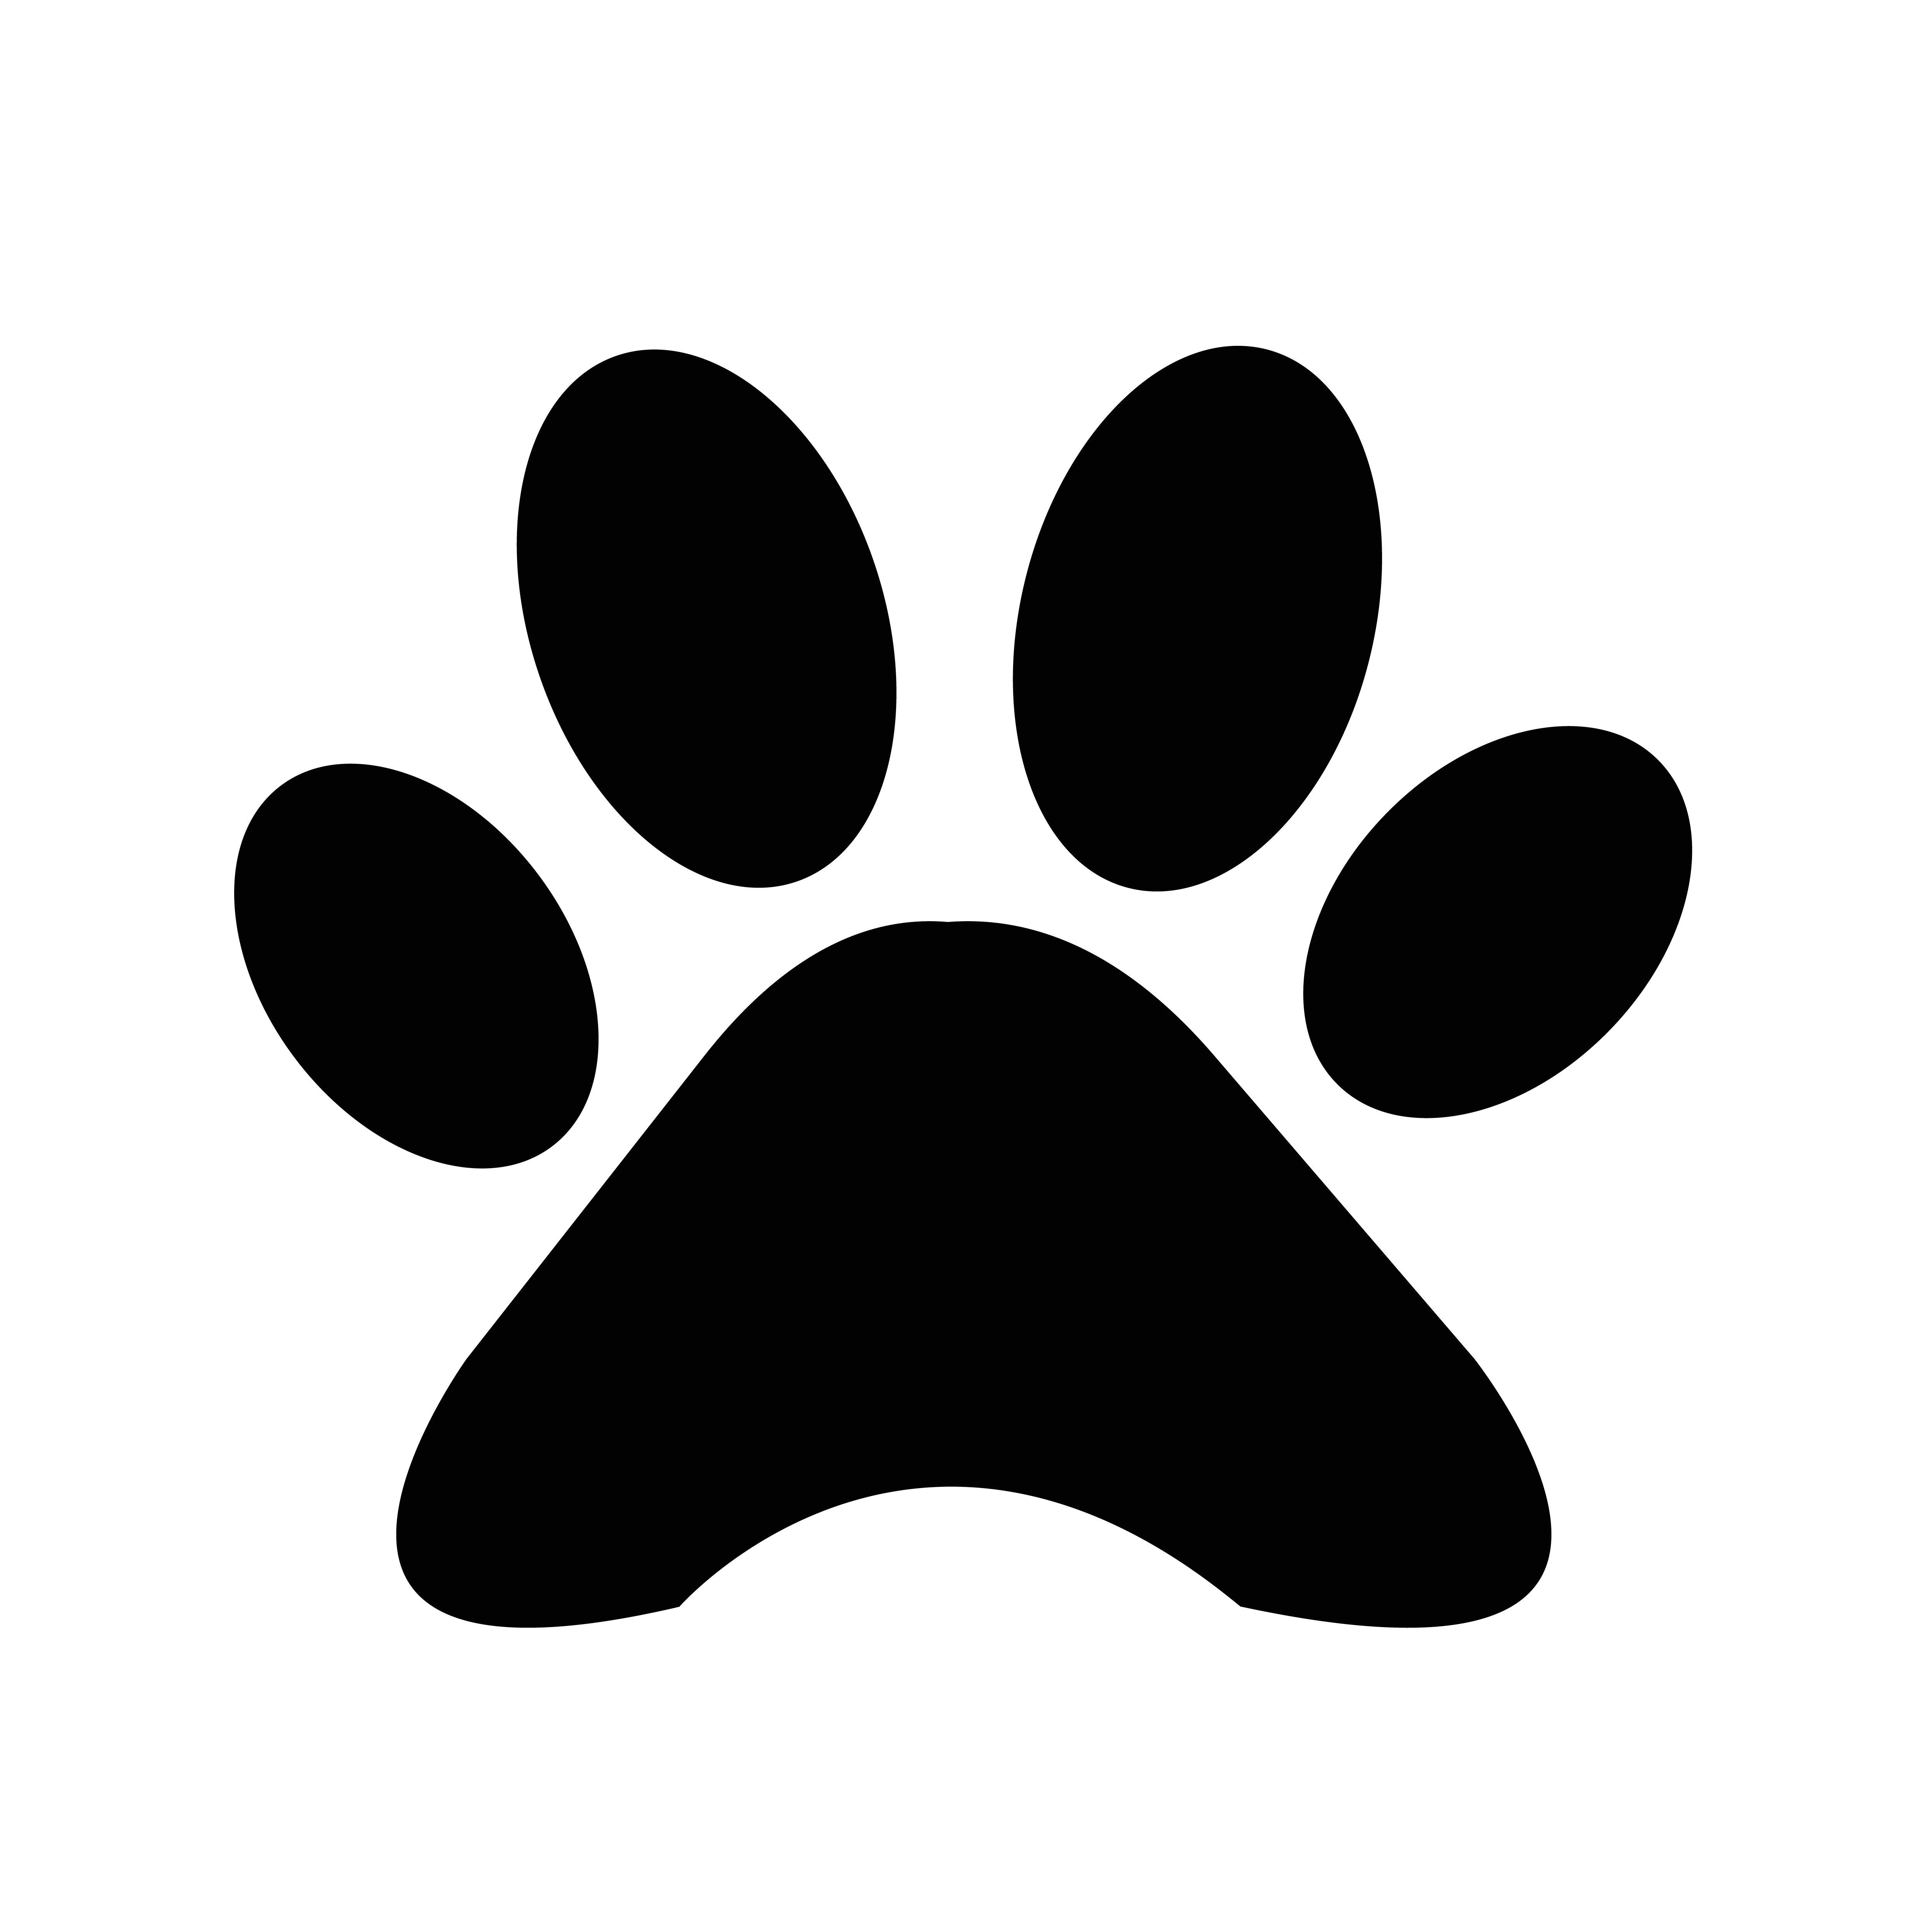 Download animal paw print icon 569591 - Download Free Vectors, Clipart Graphics & Vector Art